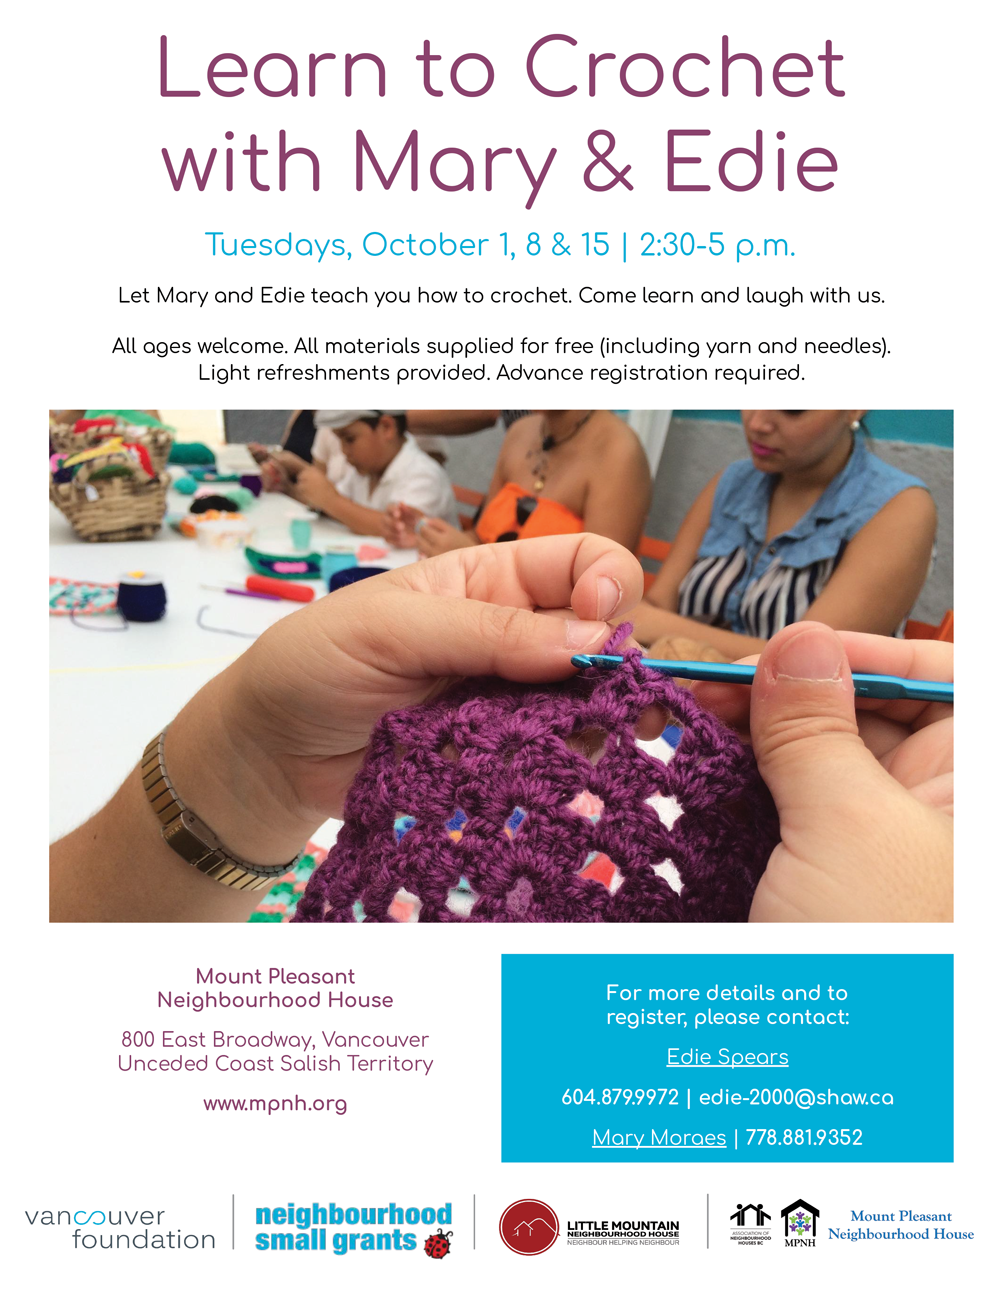 An image of the poster with program details, featuring a photo of a person's hands crocheting a square, with other people crafting in the background.